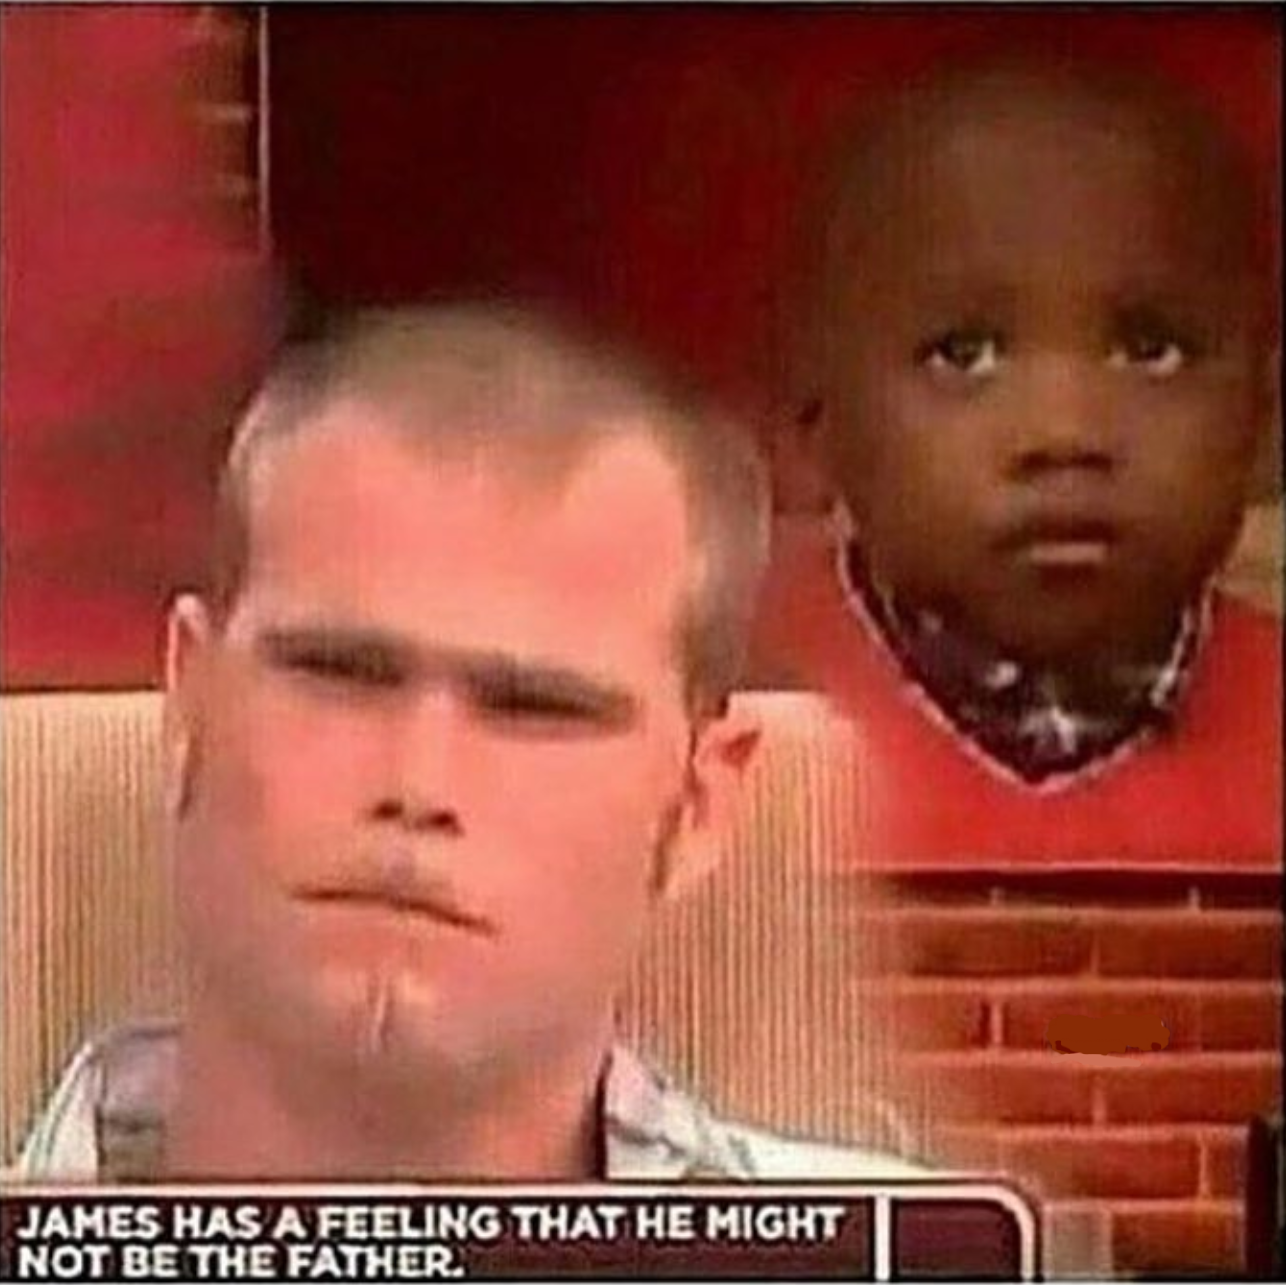 Go with your gut feeling James